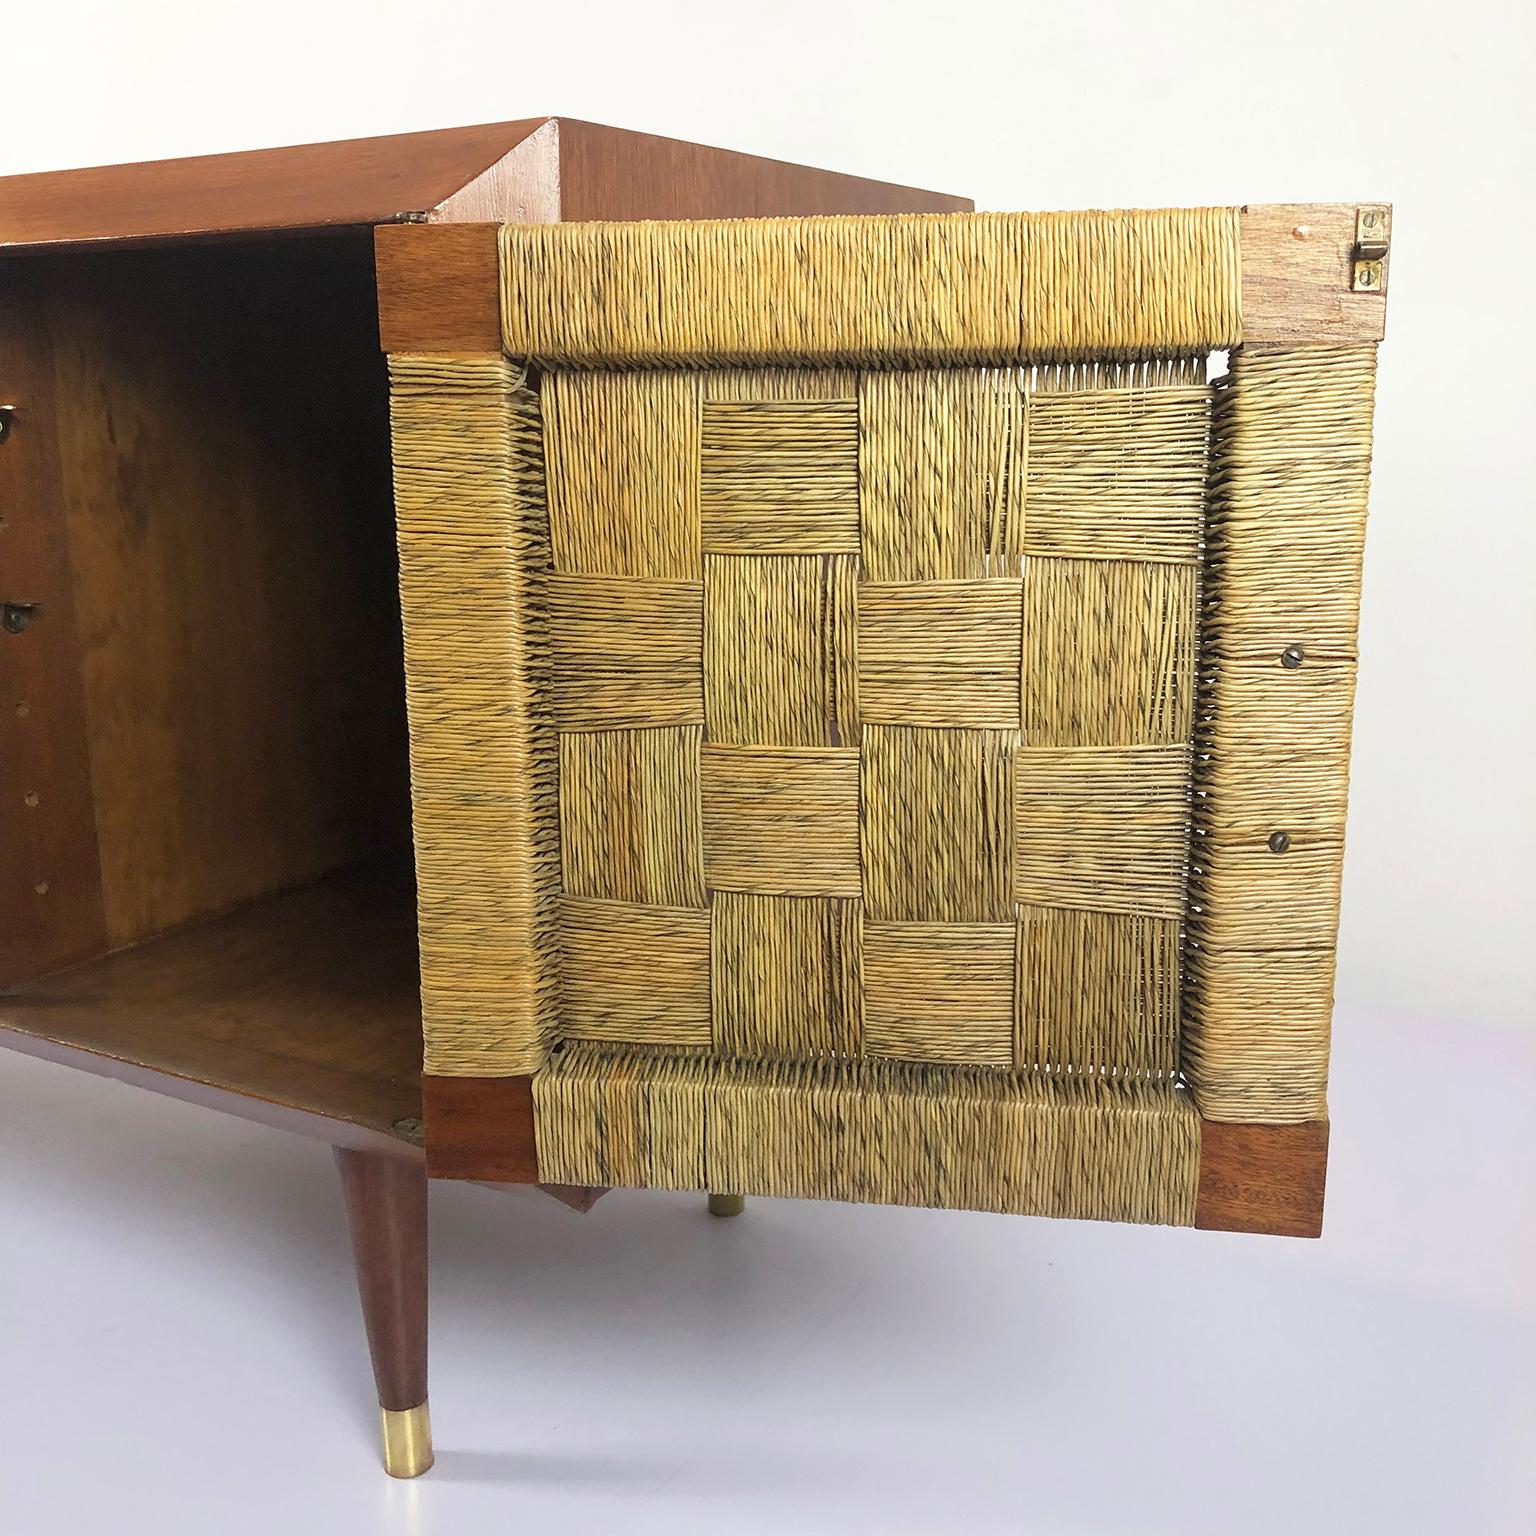 Mexican Petite Credenza in Mahogany and Woven Sea Grass Attributed to Edmond Spence For Sale